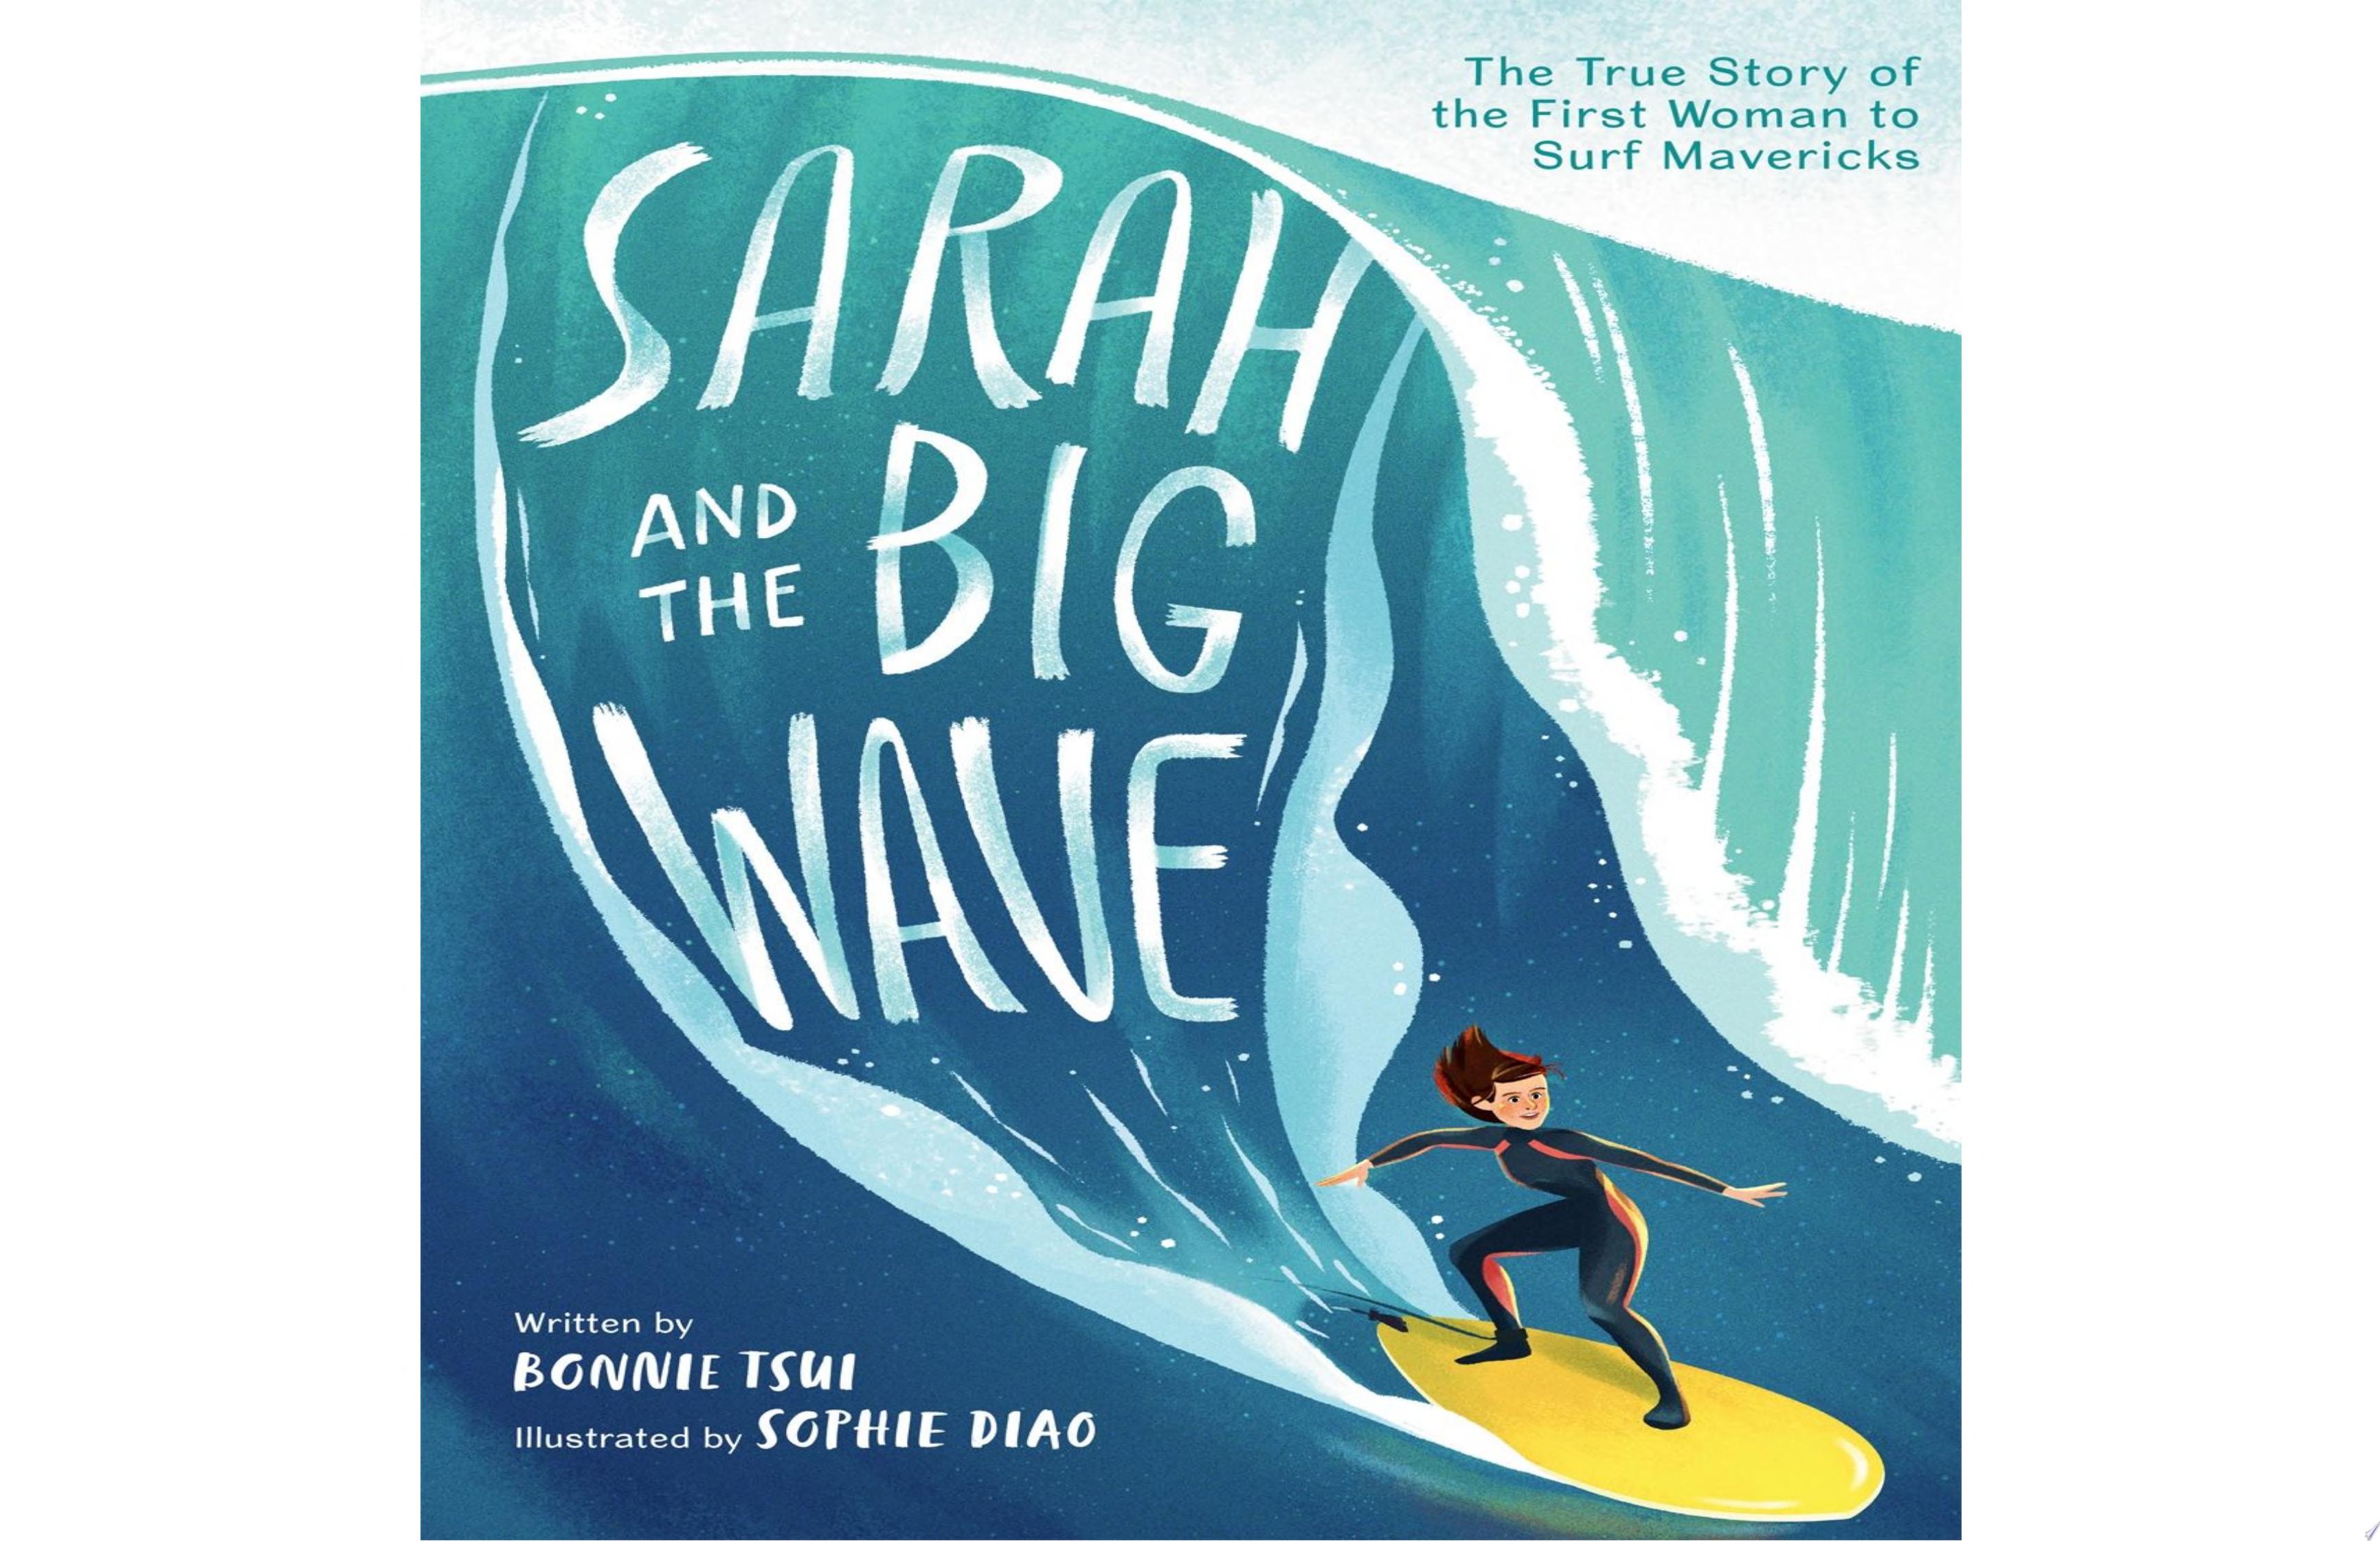 Image for "Sarah and the Big Wave"